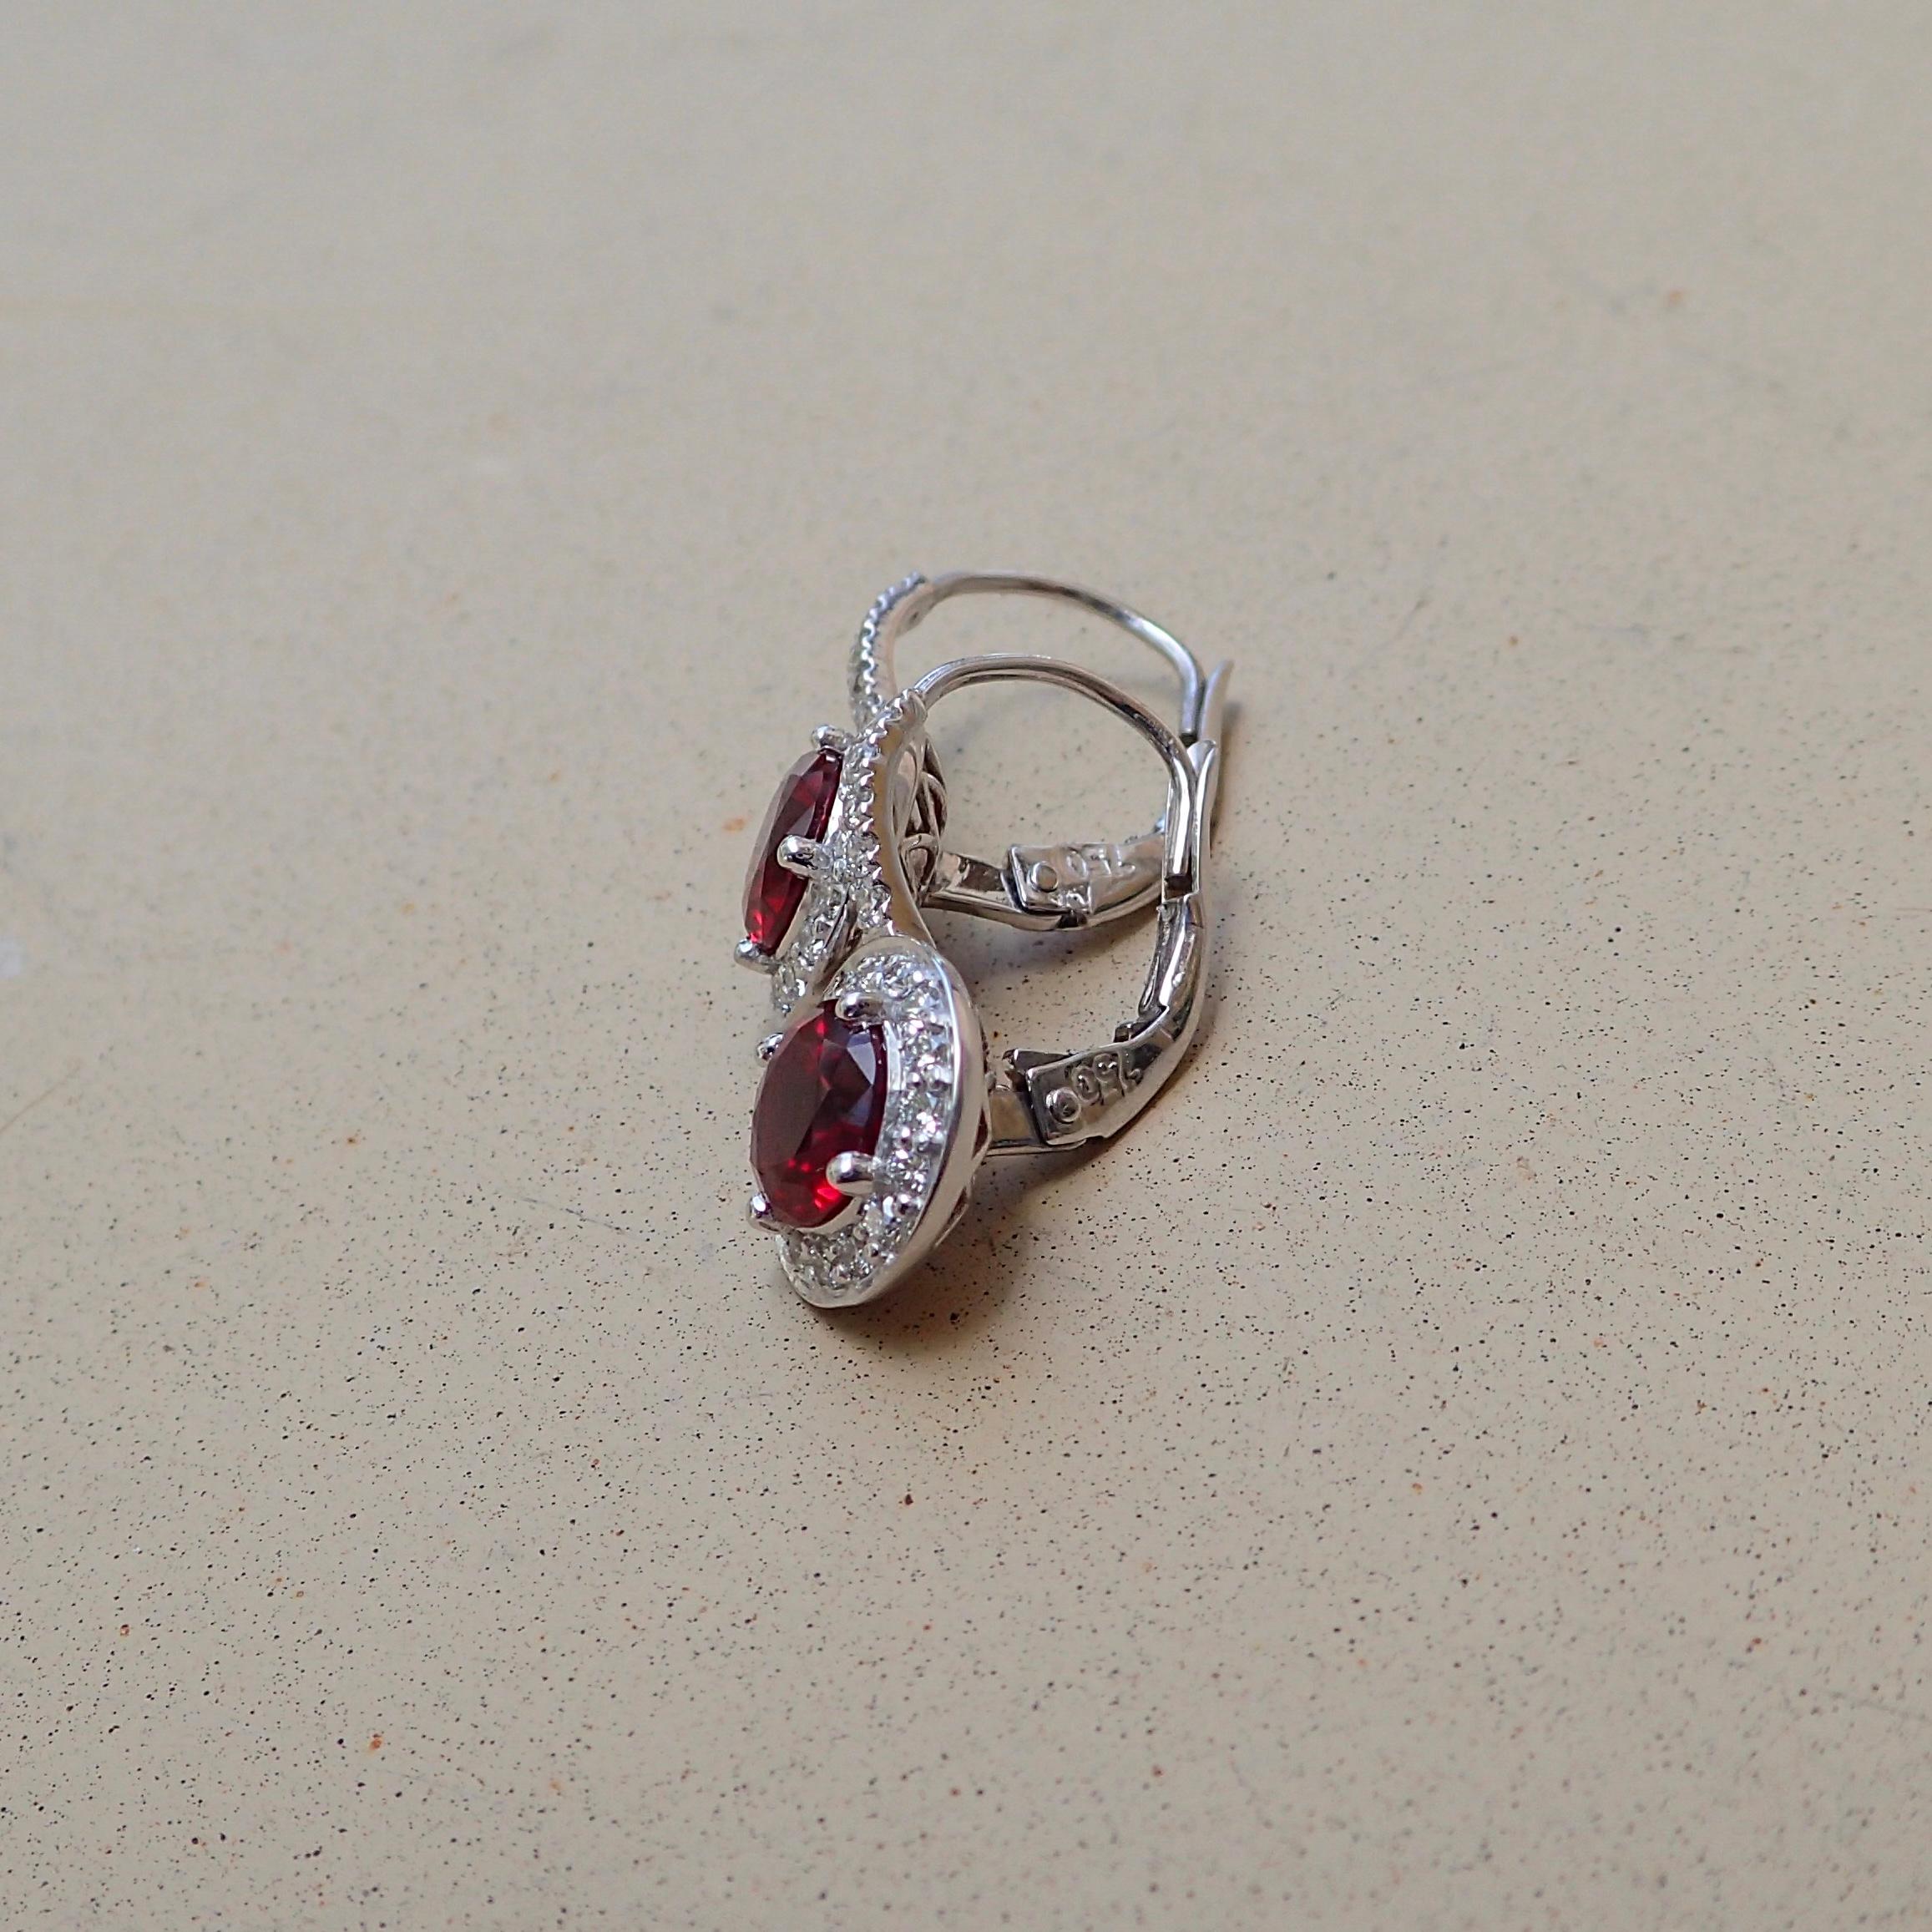 Round Cut 18k White Gold Earrings - 2.43 carats Chatham-Created Ruby & 0.41 carats Diamond